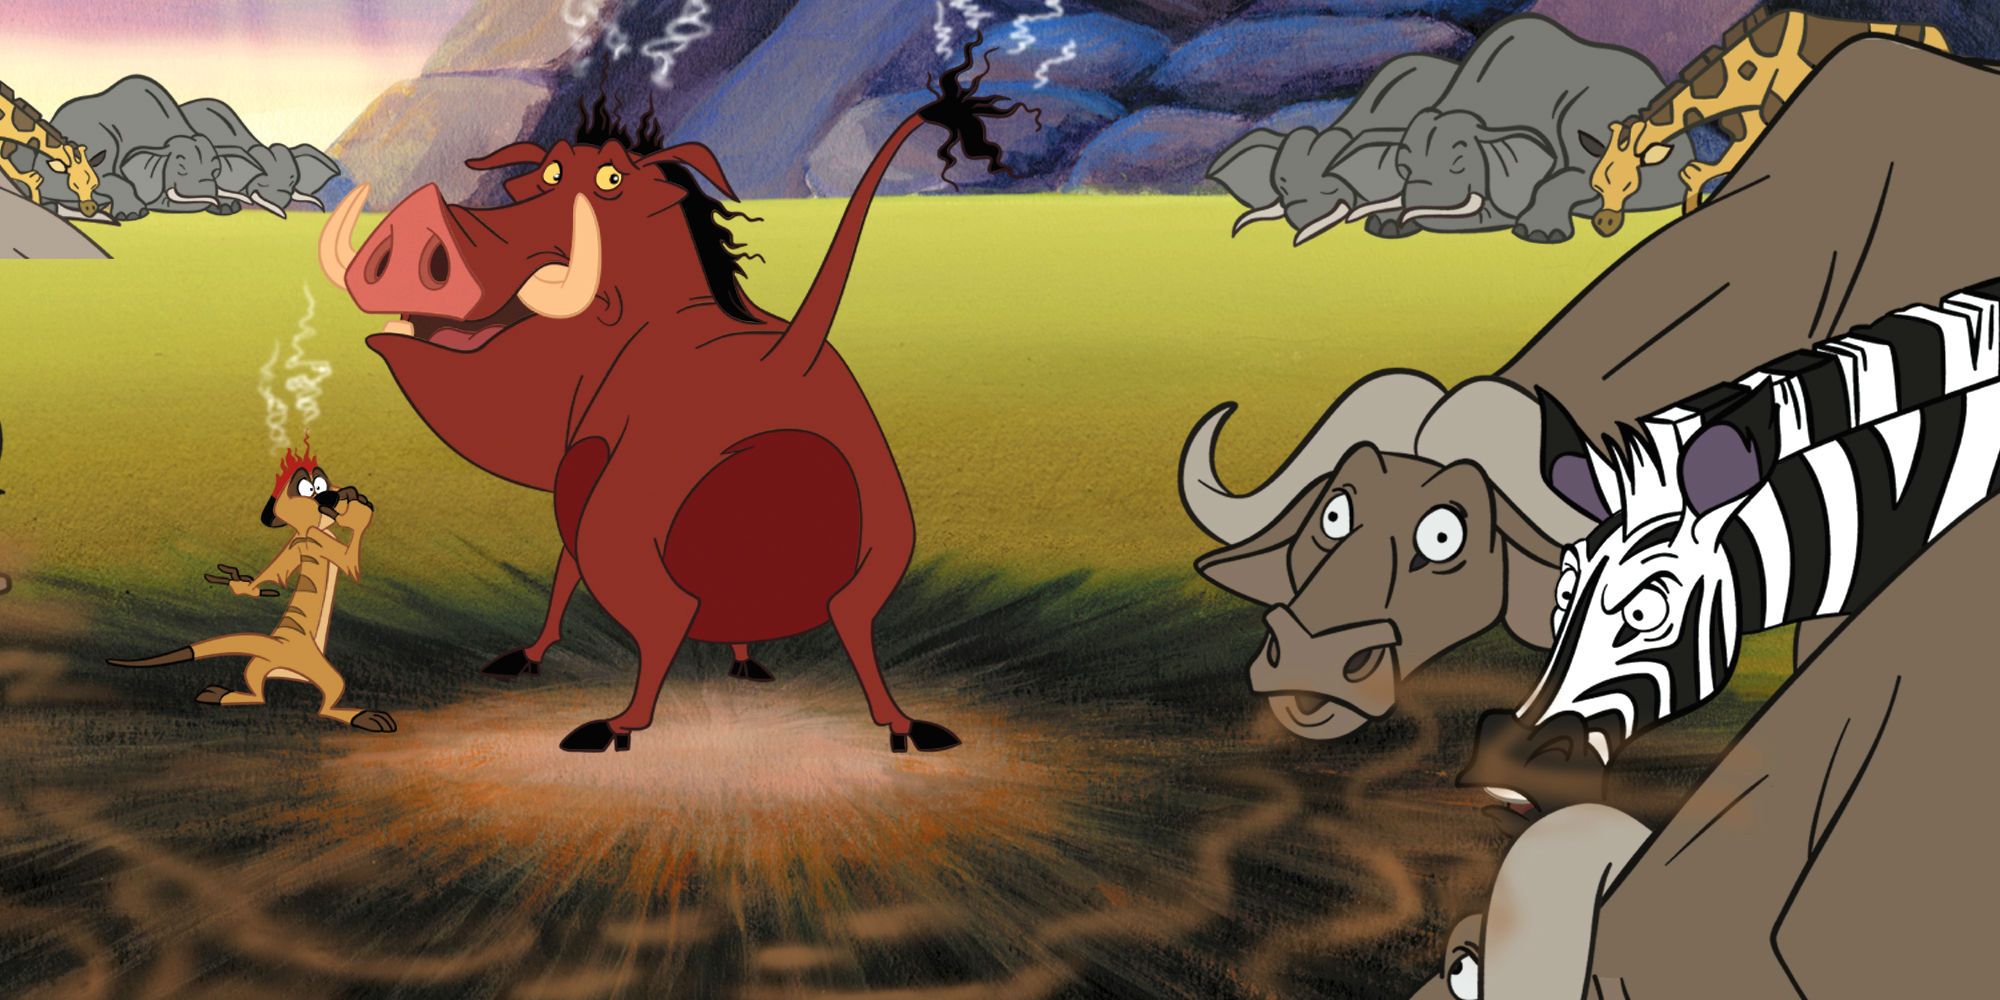 Timon and Pumbaa in Lion King 1 1/2